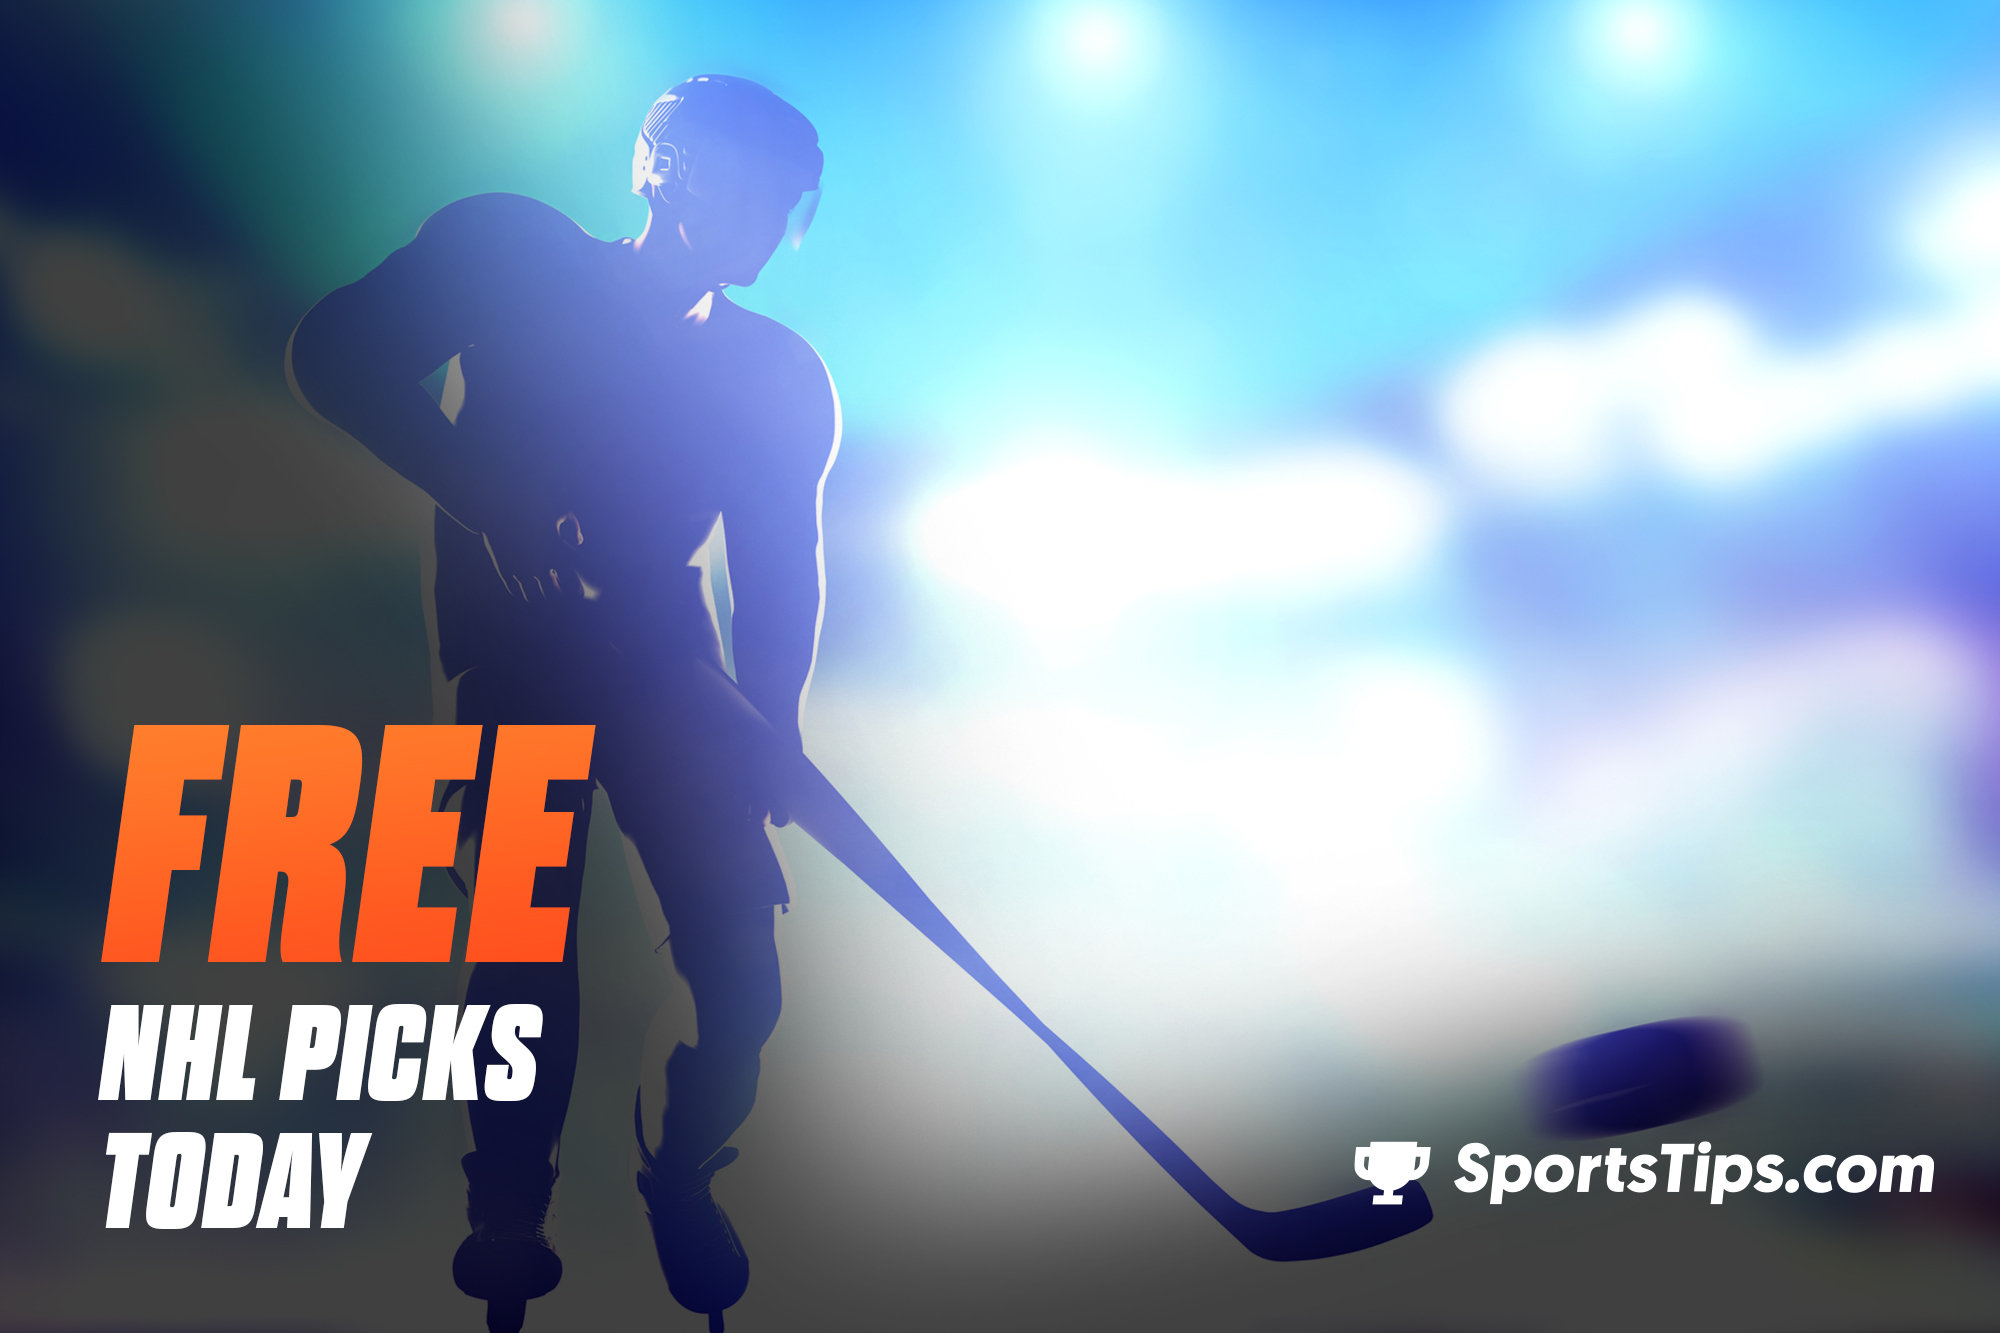 Free NHL Picks Today for Monday, January 31st, 2022